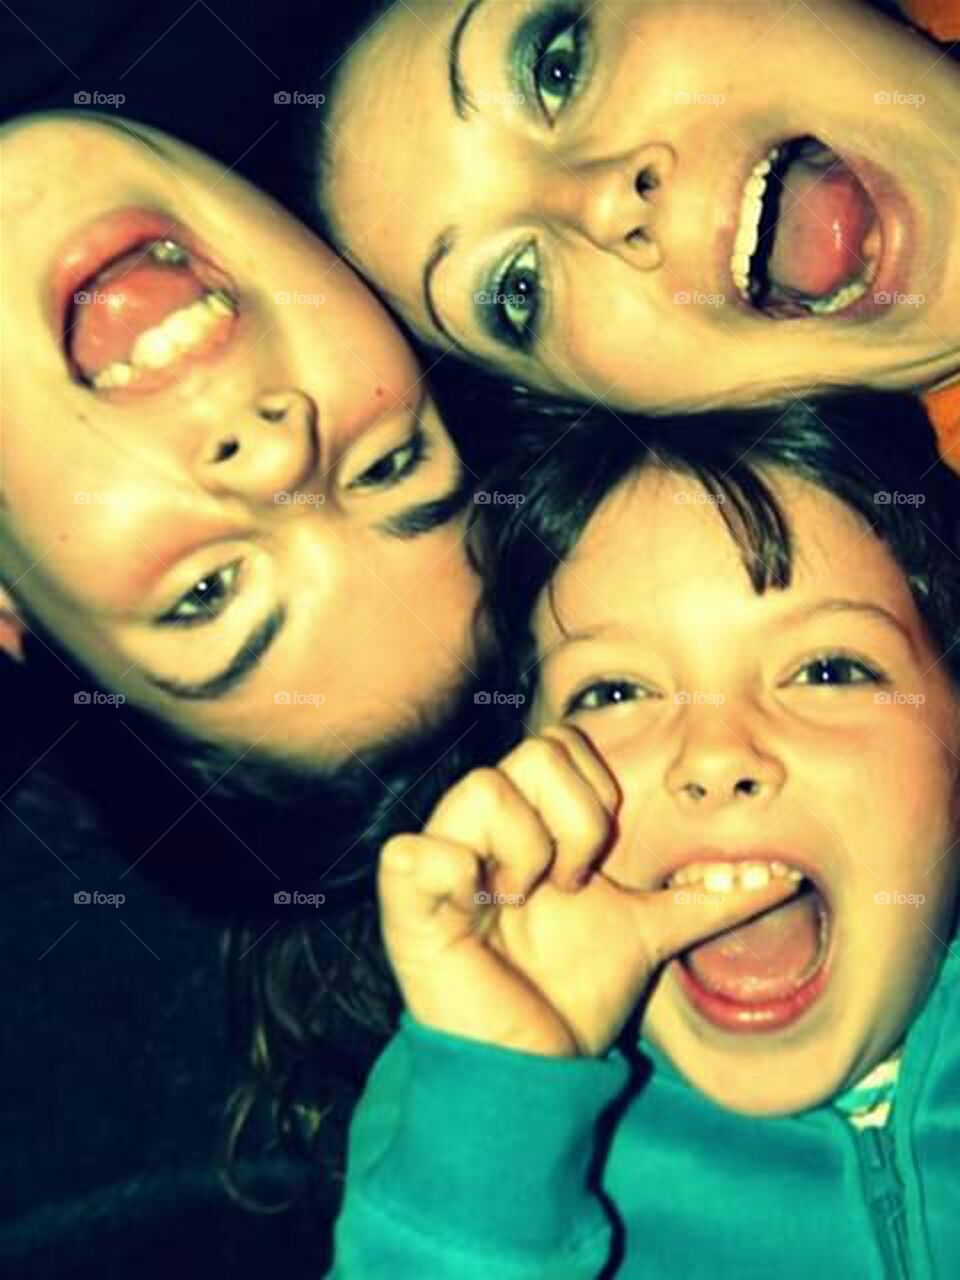 mom and two daughters being silly and having fun